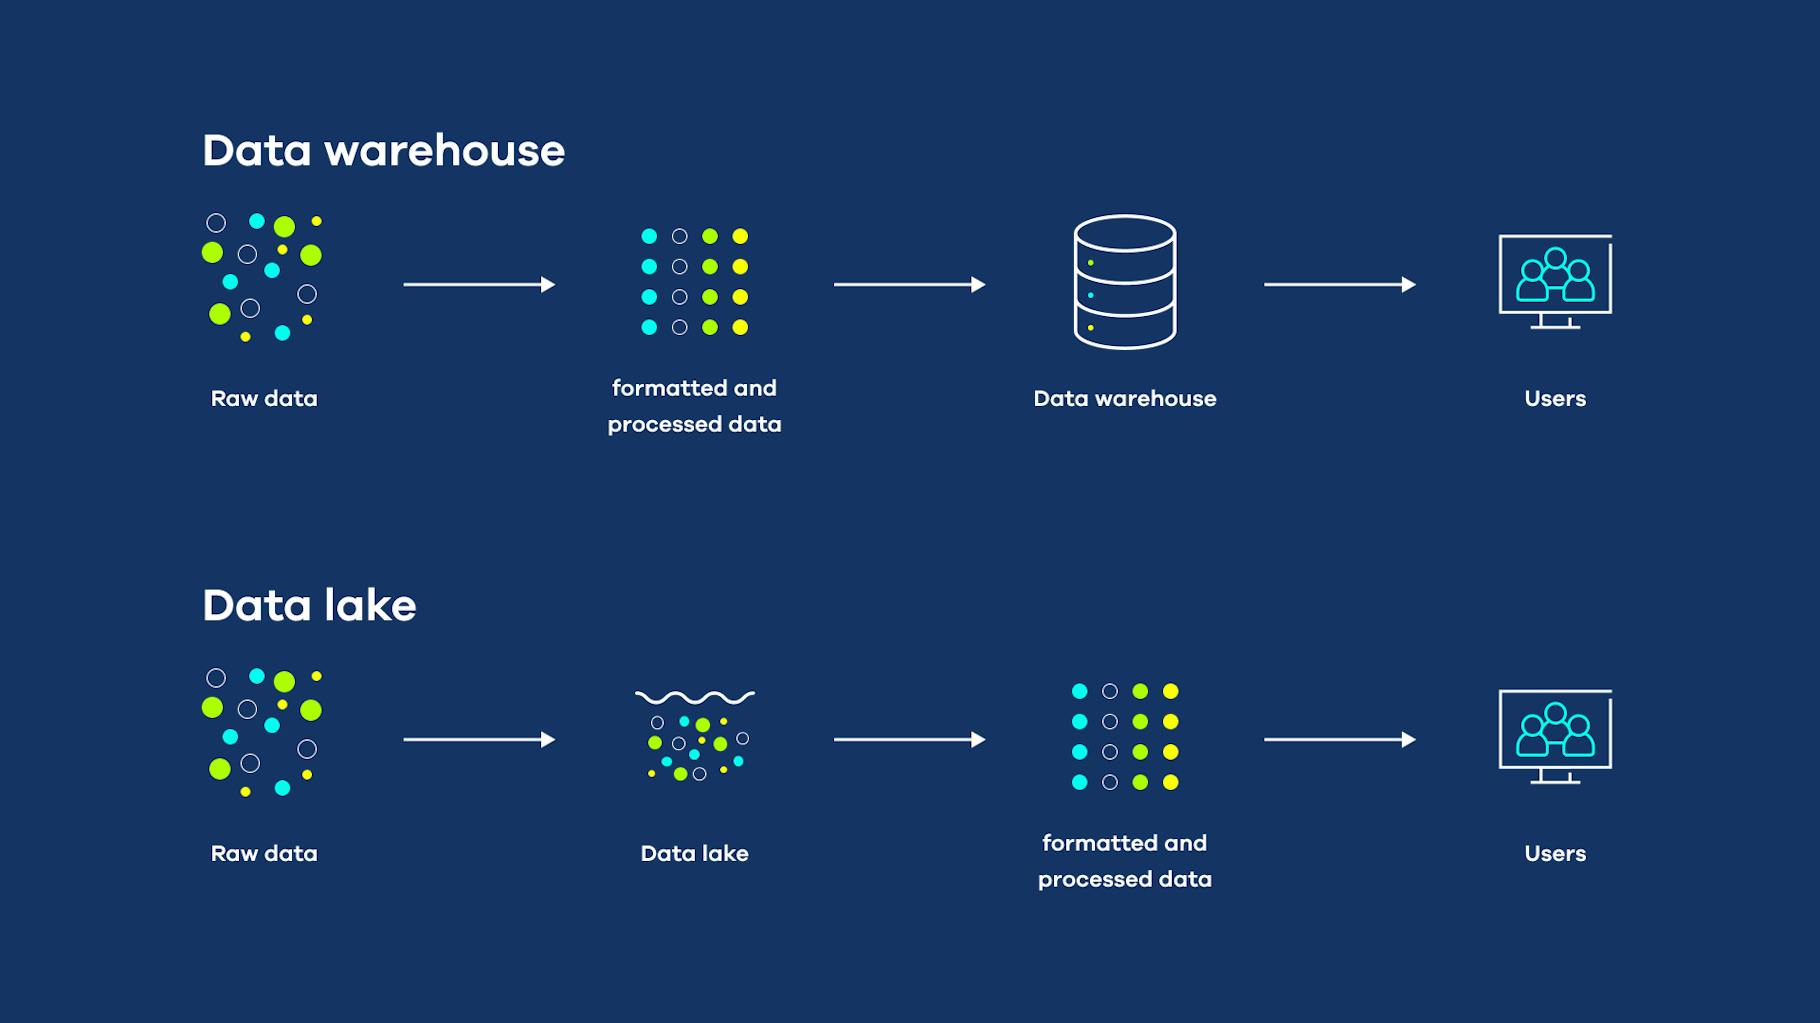 A key difference between data warehouses and data lakes is the degree to which the data is structured.